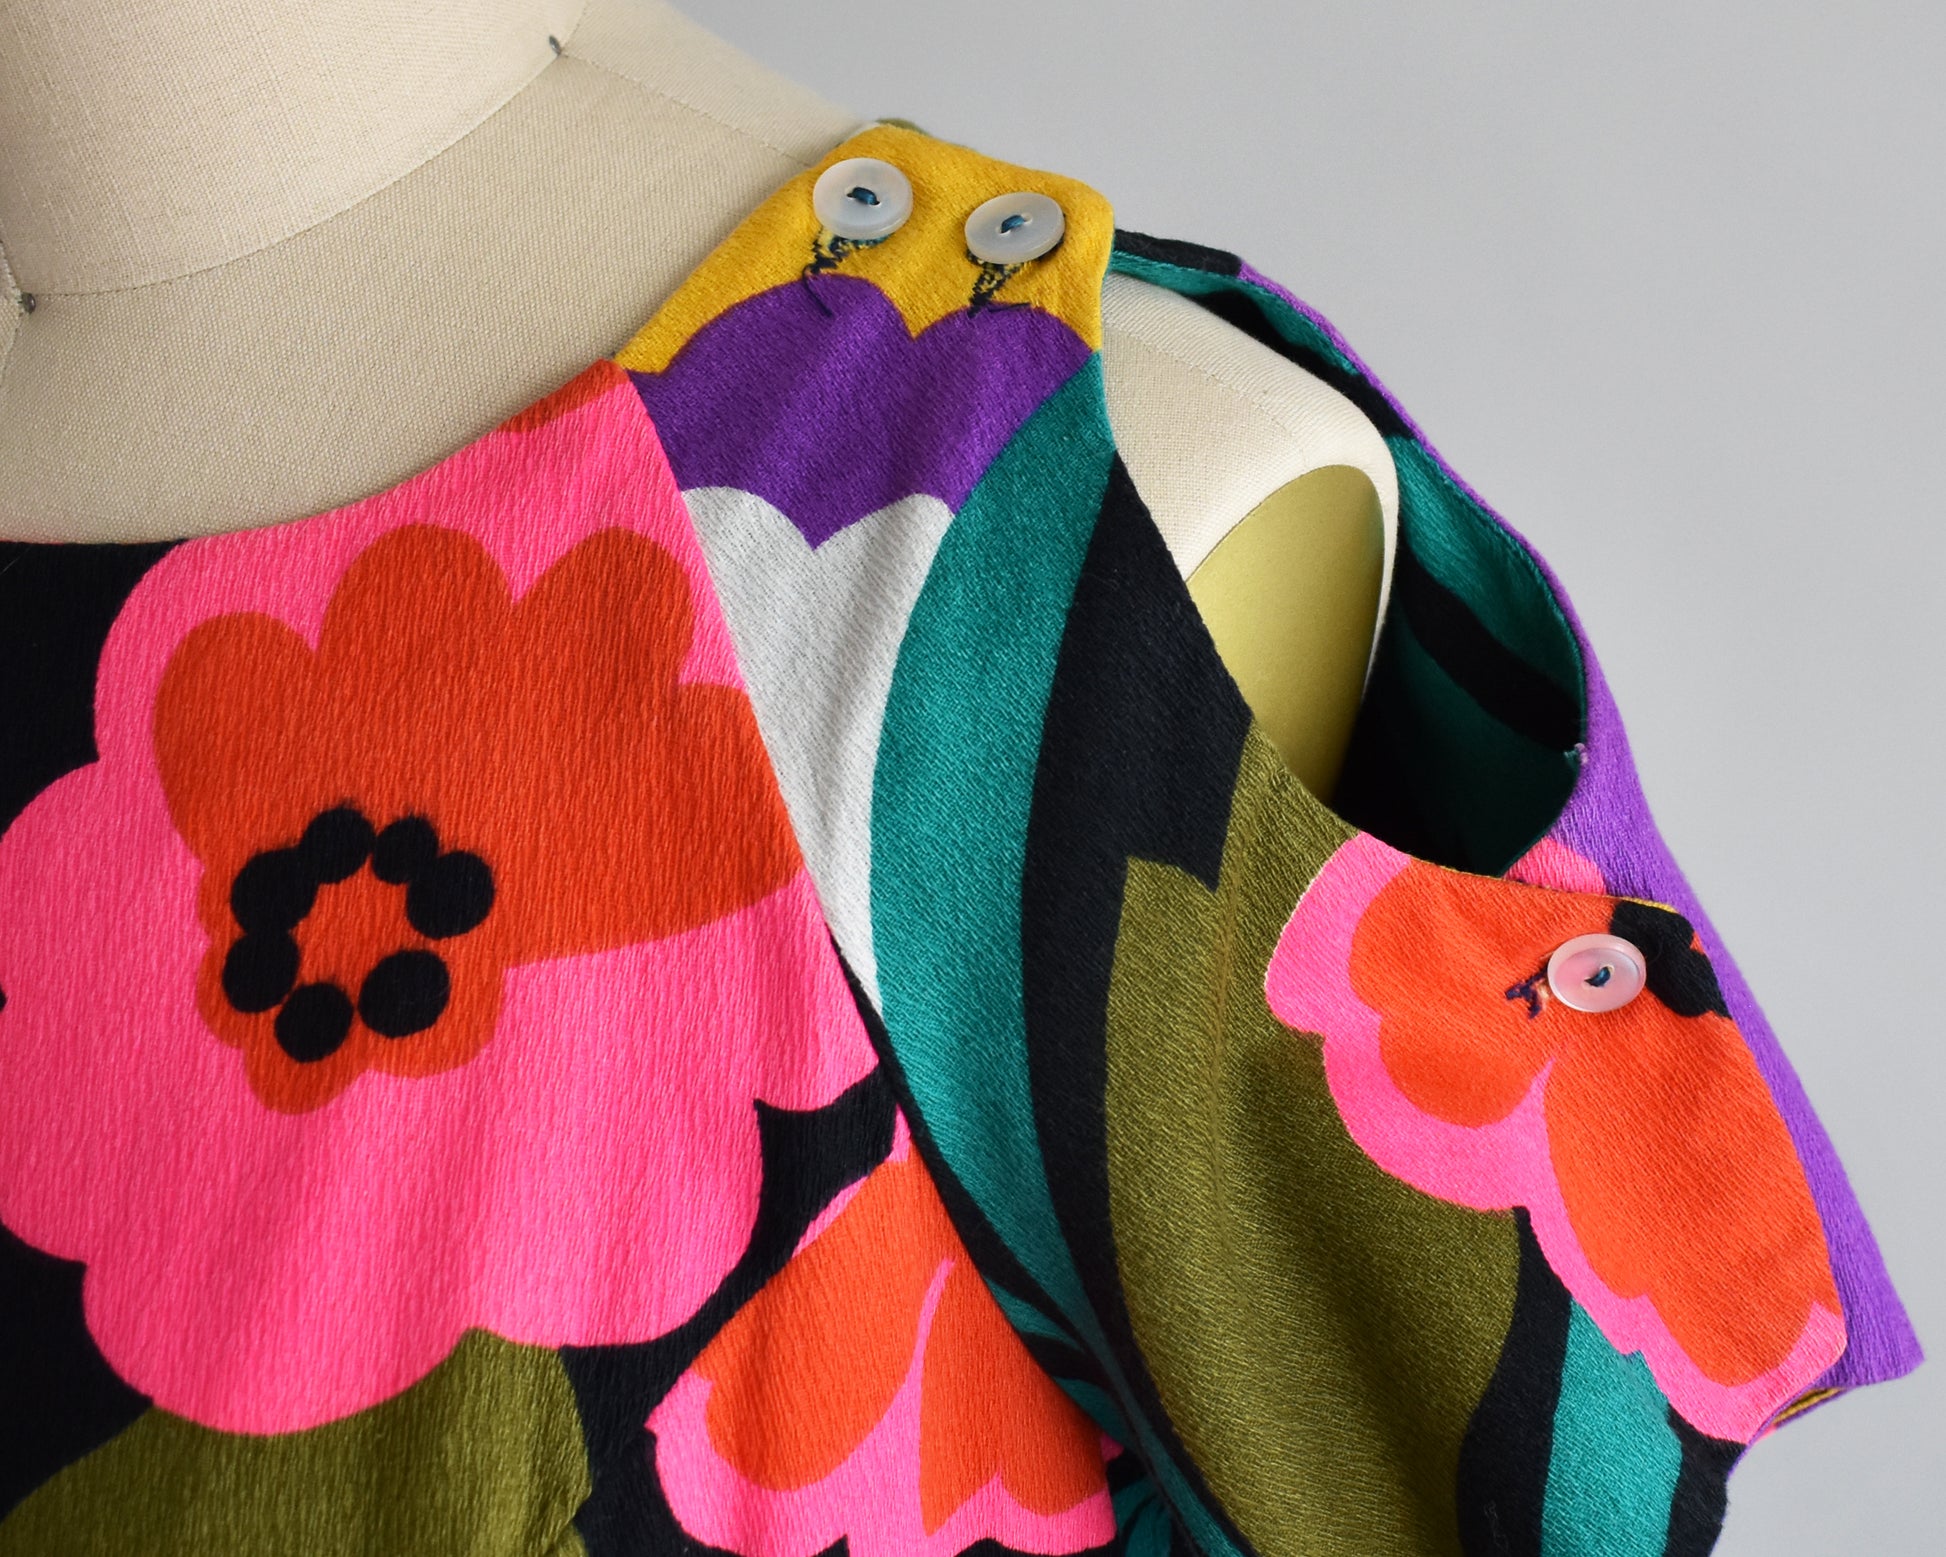 Close up of the could shoulder, which has two buttons on the top of the shoulder and one on the sleeve.